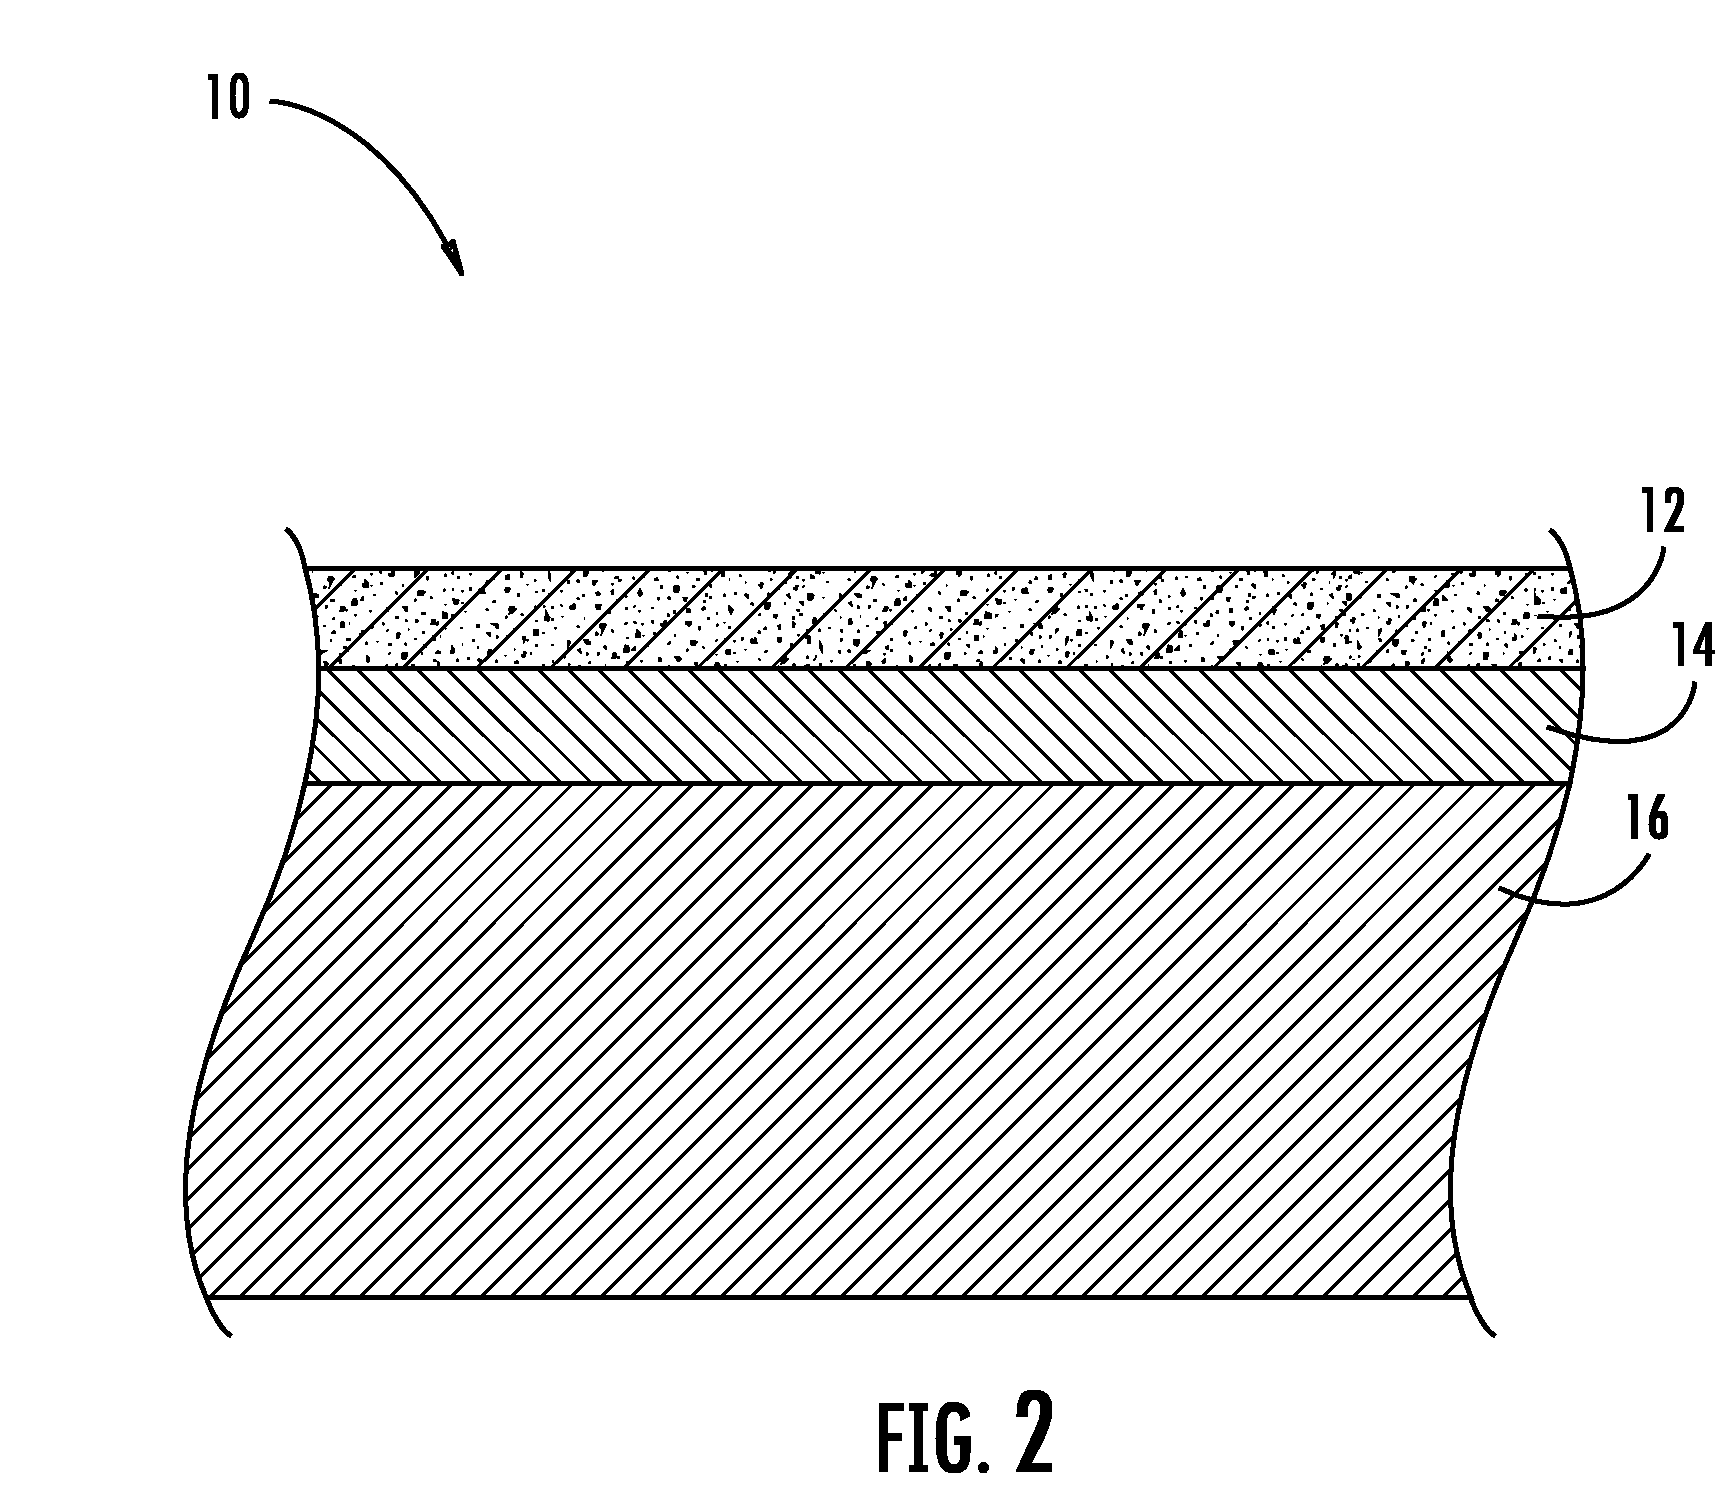 Combustion Turbine Component Having Rare Earth CoNiCrAl Coating and Associated Methods